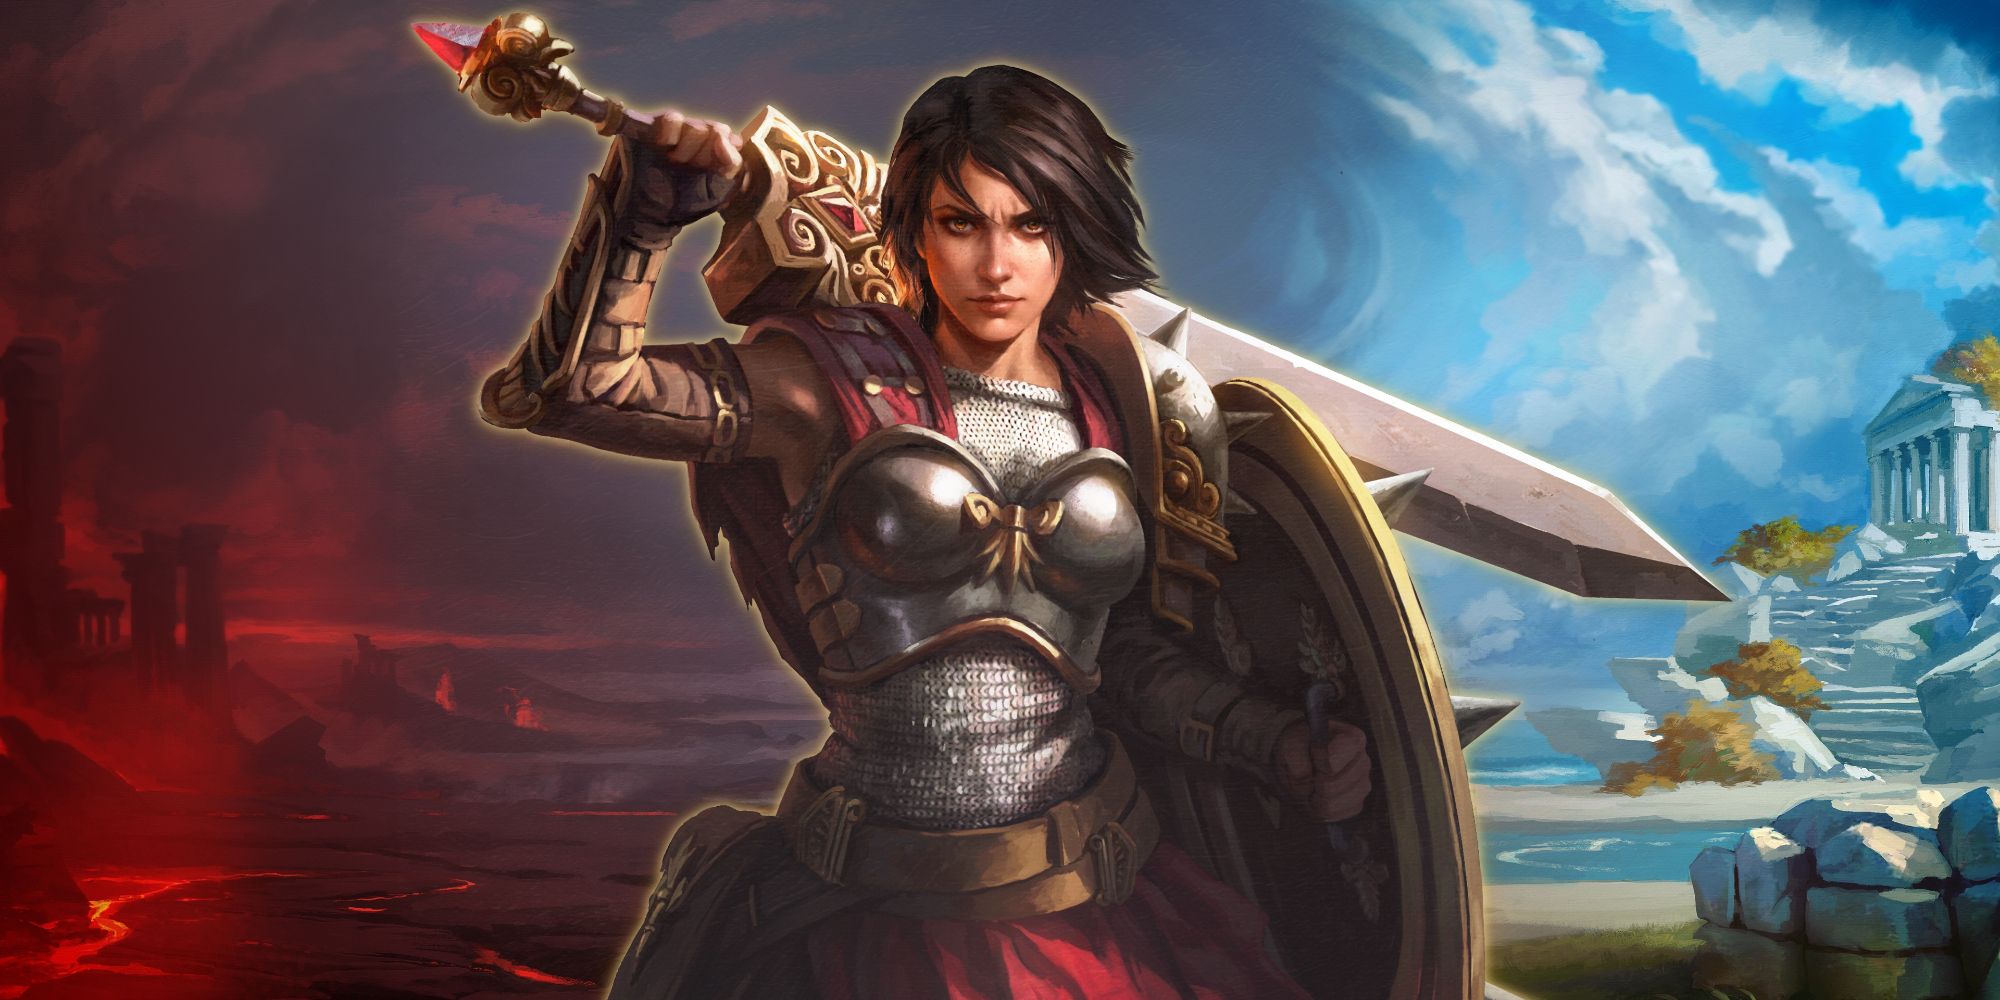 Bellona with Order and Chaos backgrounds on the cover image for the Smite 10 Year Deluxe Edition